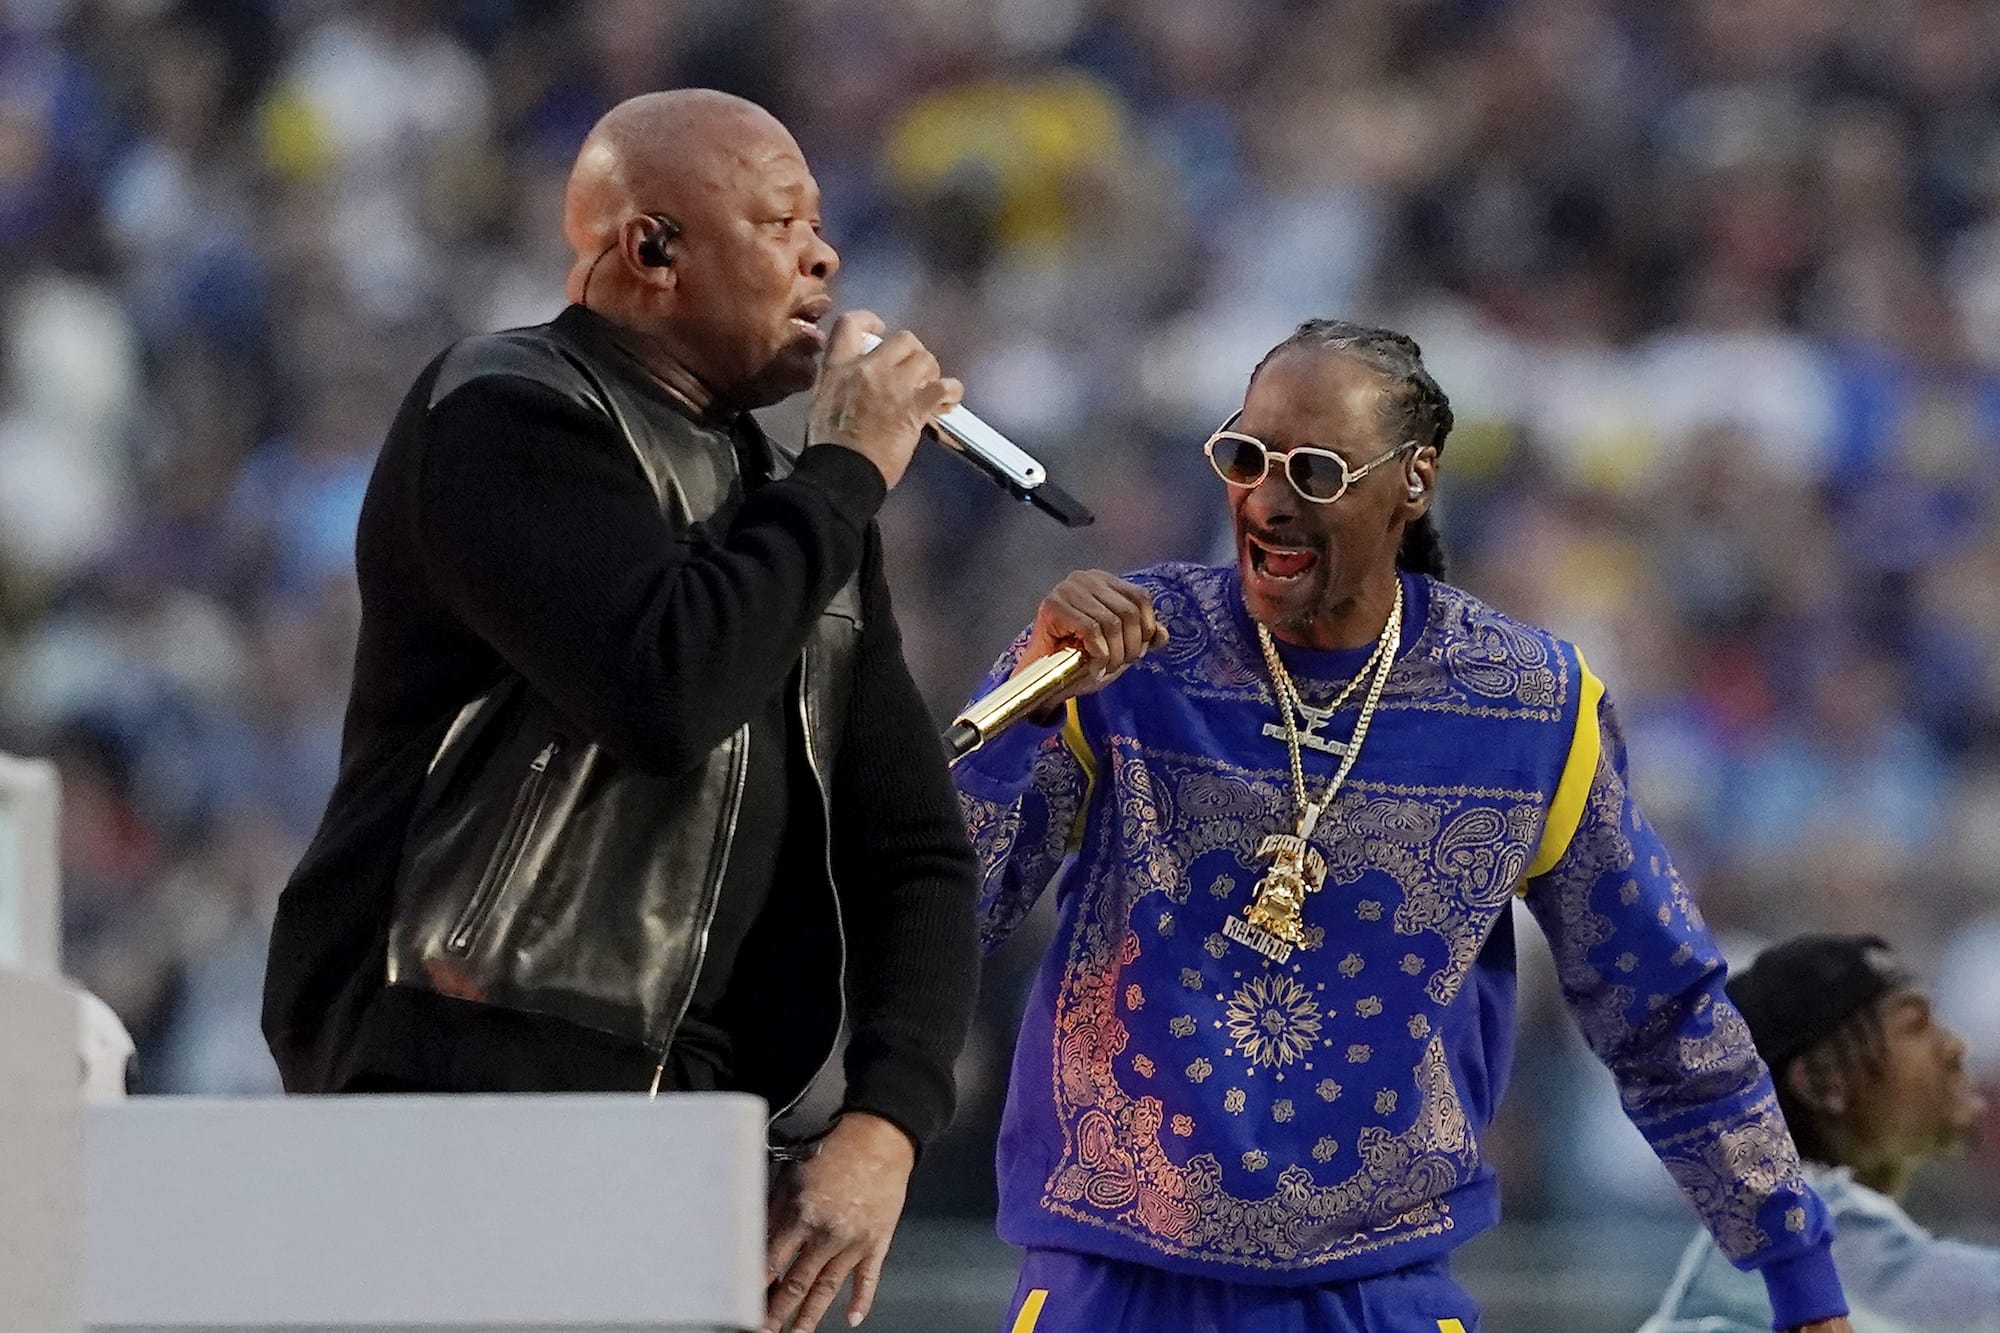 Dr. Dre and Snoop Dogg performing during Super Bowl halftime show